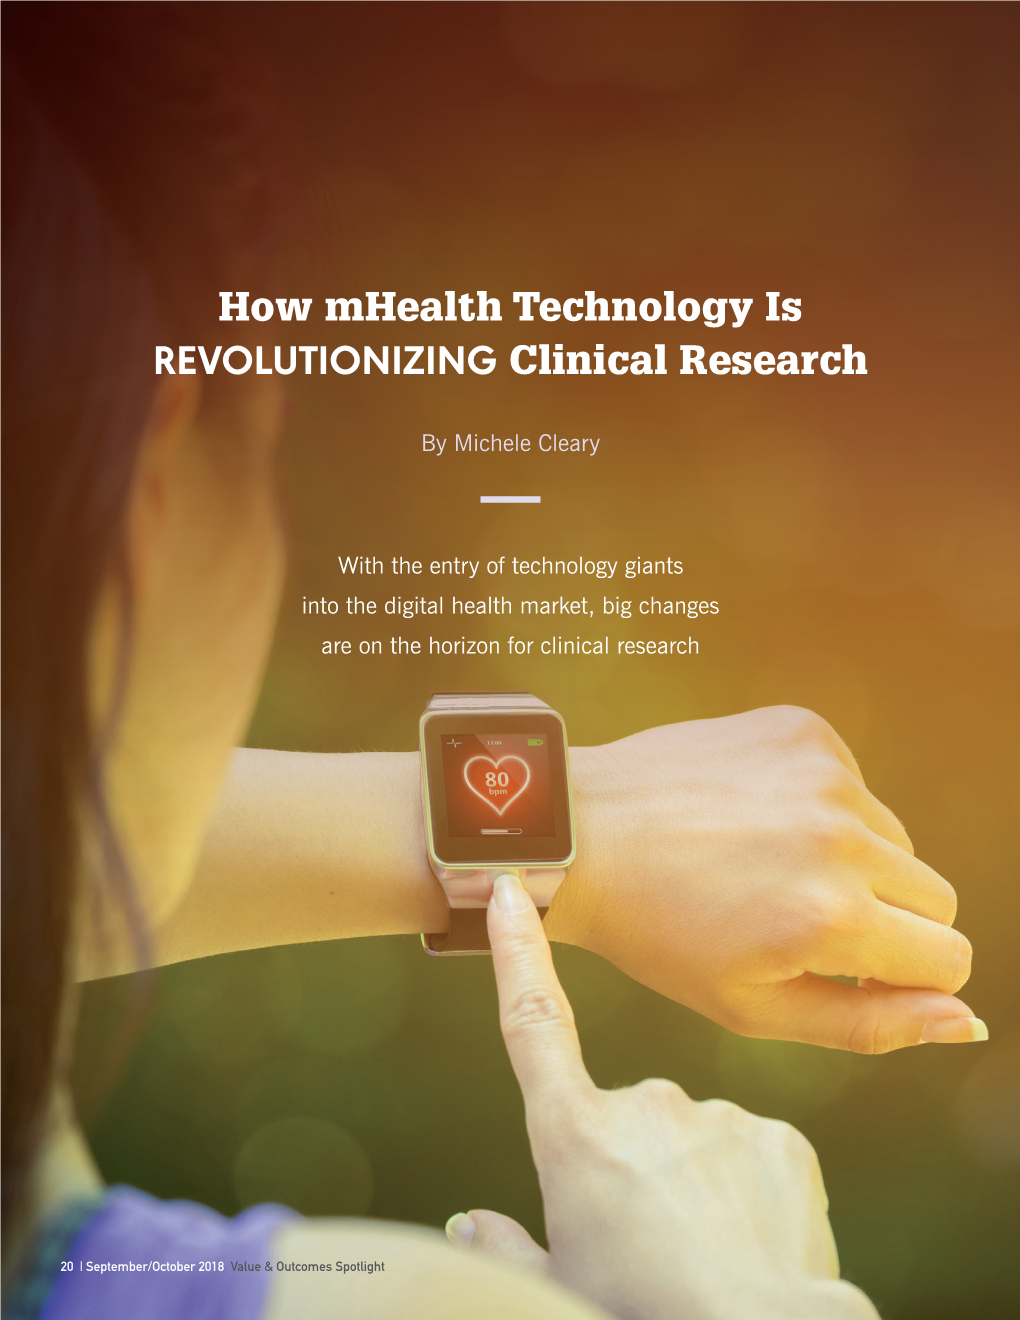 How Mhealth Technology Is REVOLUTIONIZING Clinical Research